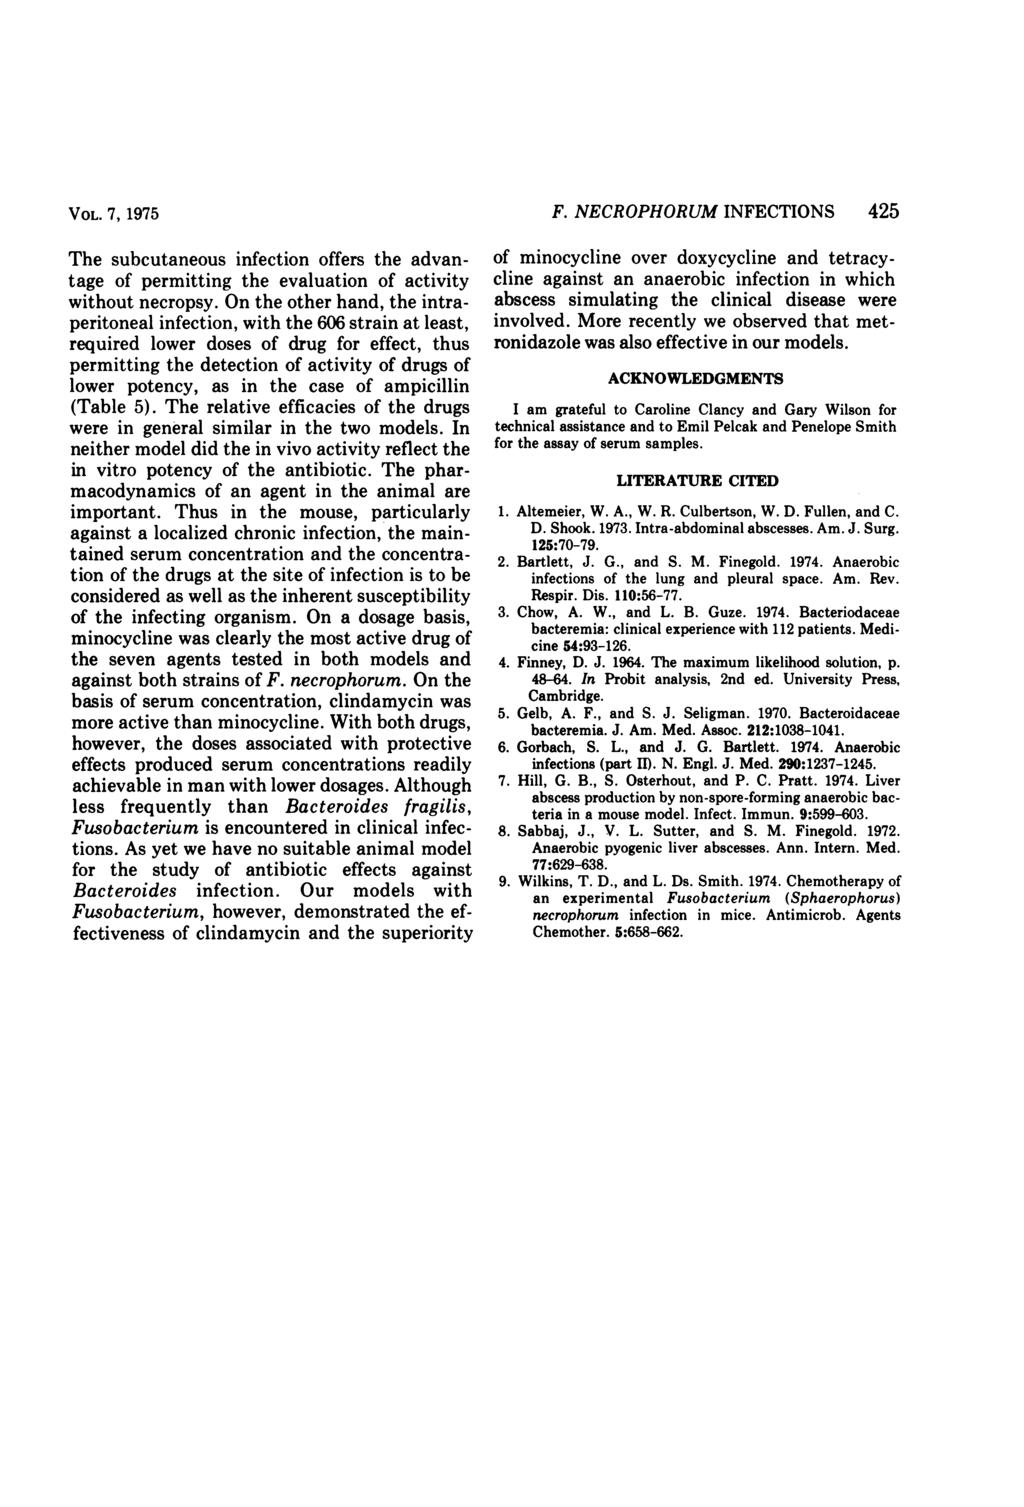 VOL. 7, 1975 The subcutaneous infection offers the advantage of permitting the evaluation of activity without necropsy.